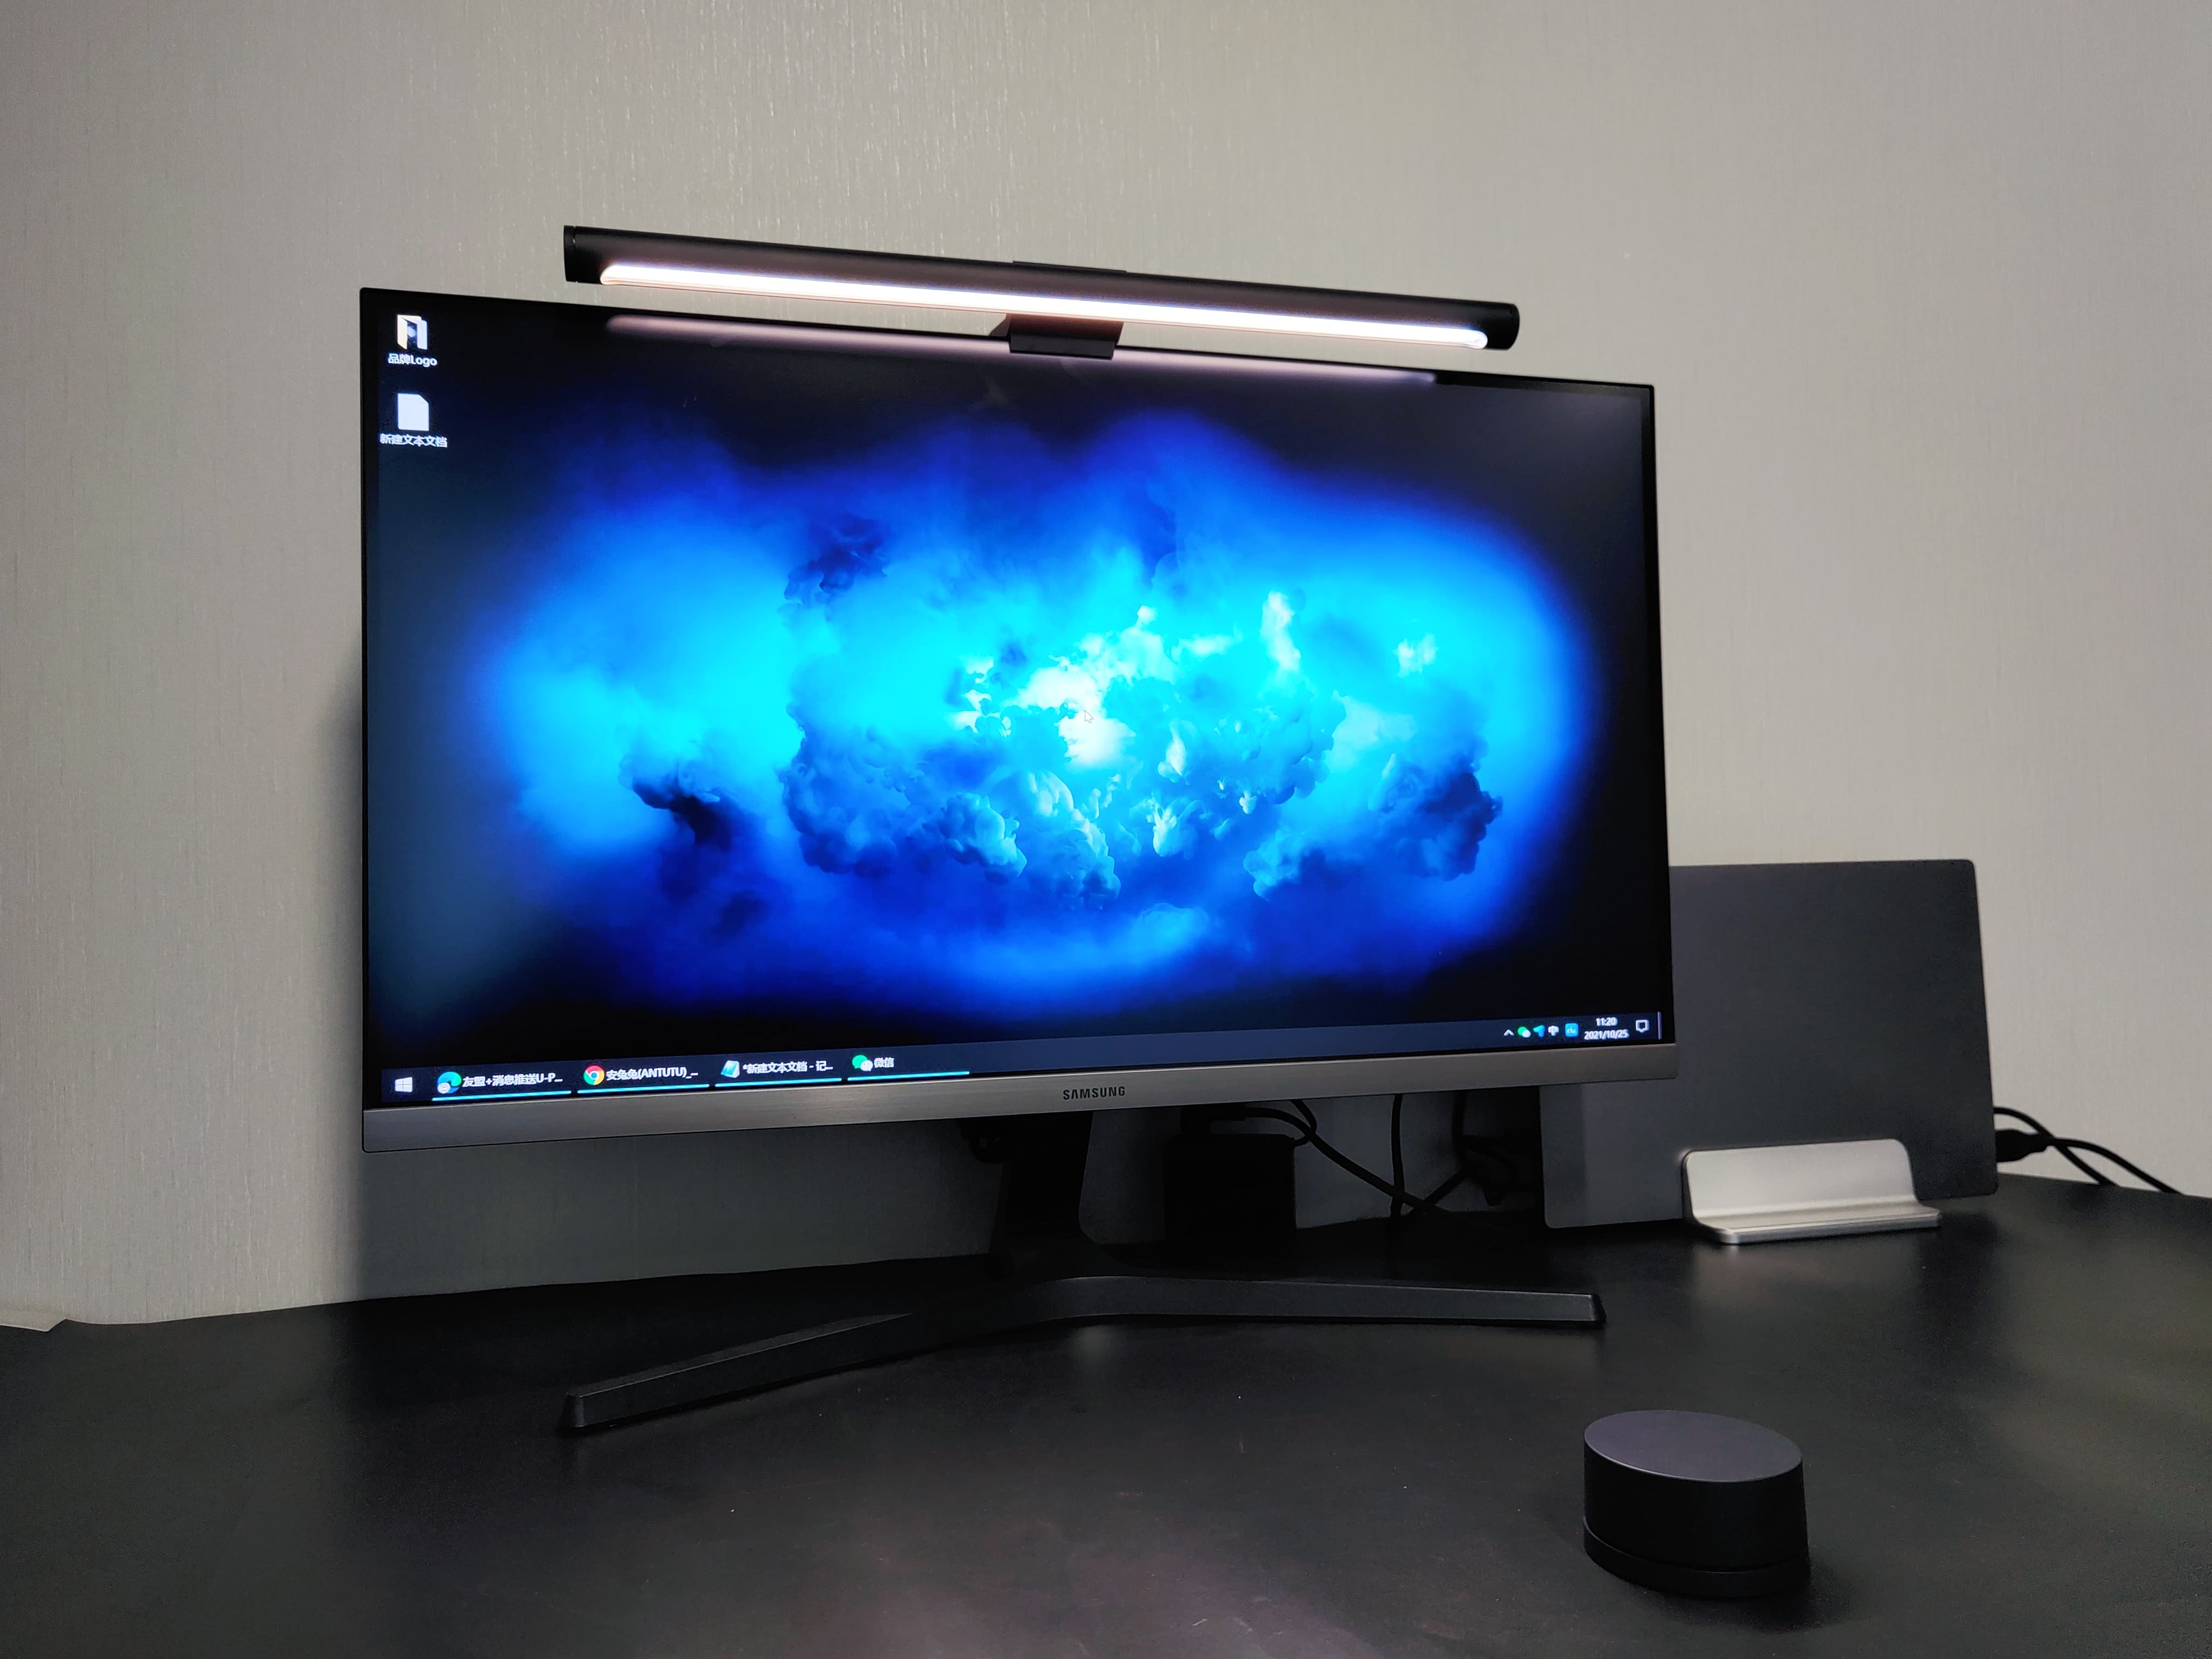 Mijia Display Hanging Lamp 1S out-of-the-box experience: only 229 yuan to experience a smarter experience